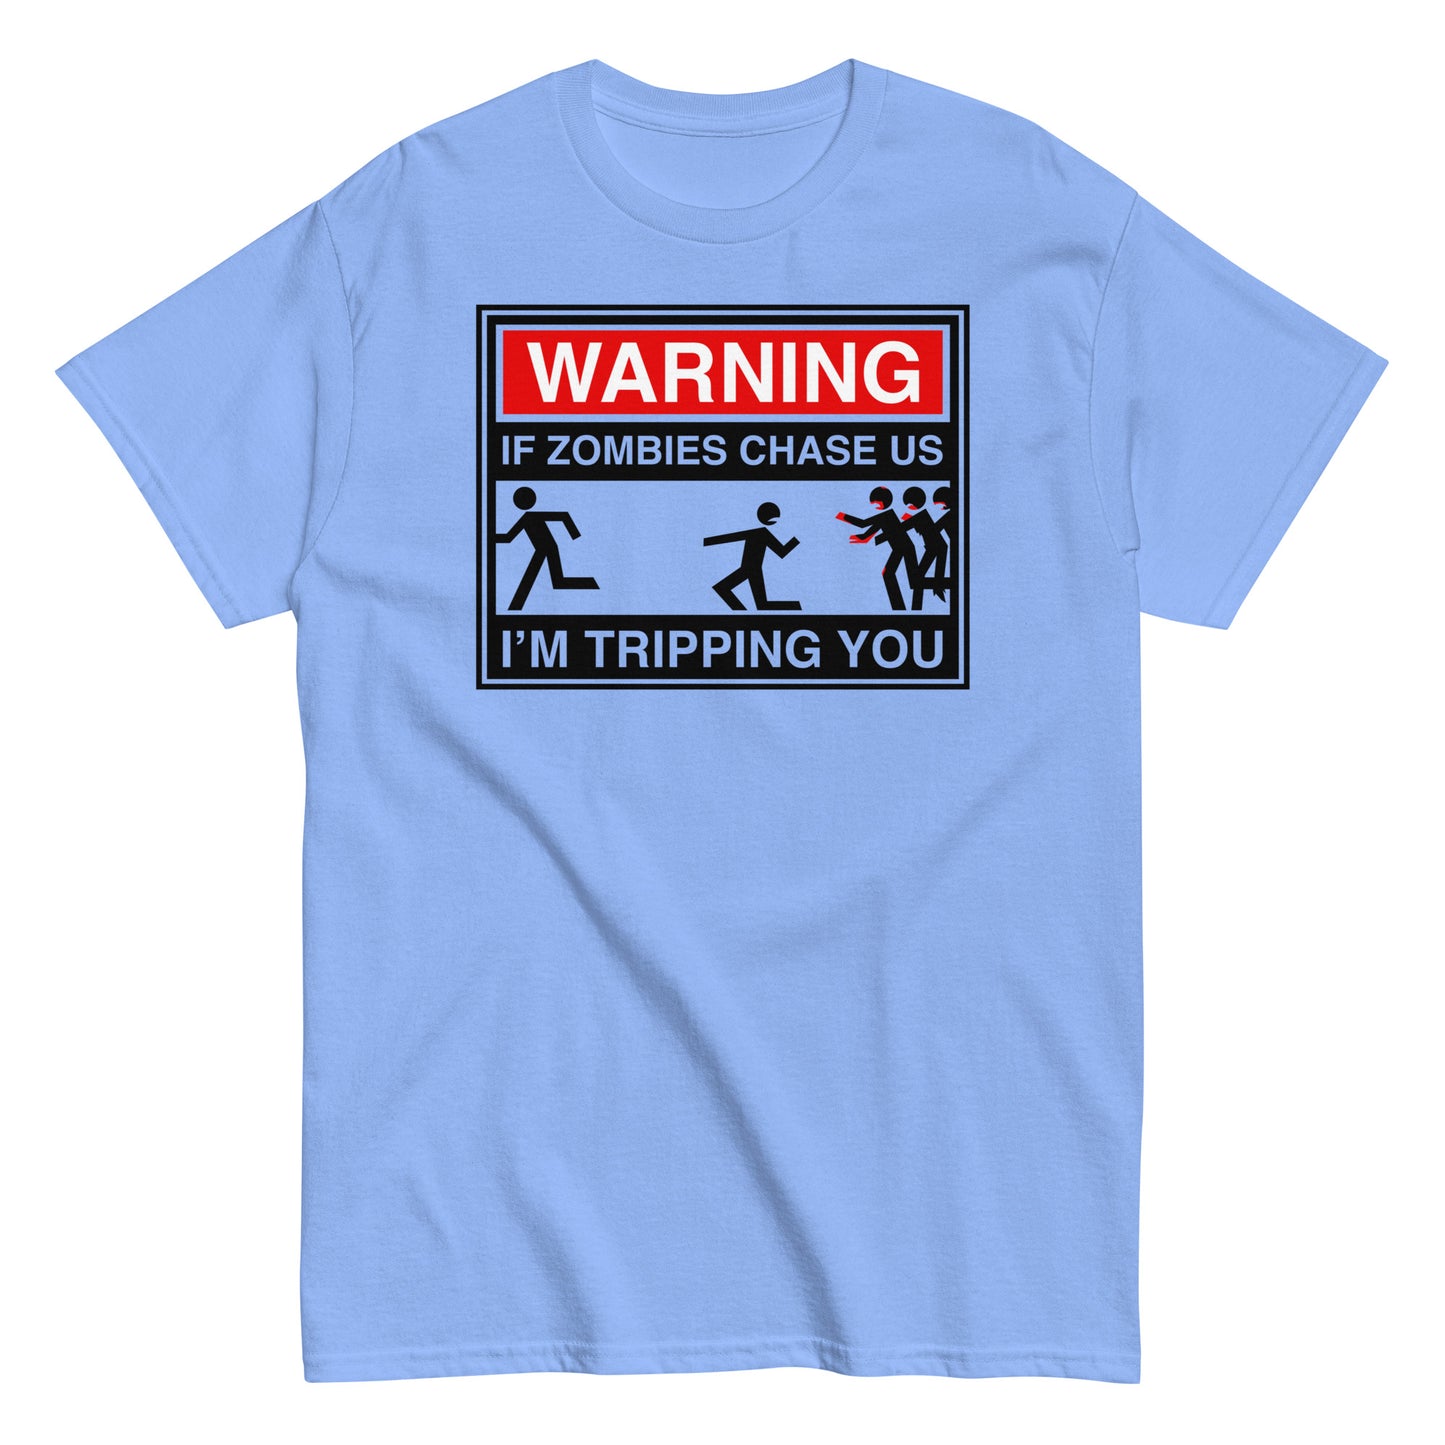 If Zombies Chase Us Men's Classic Tee